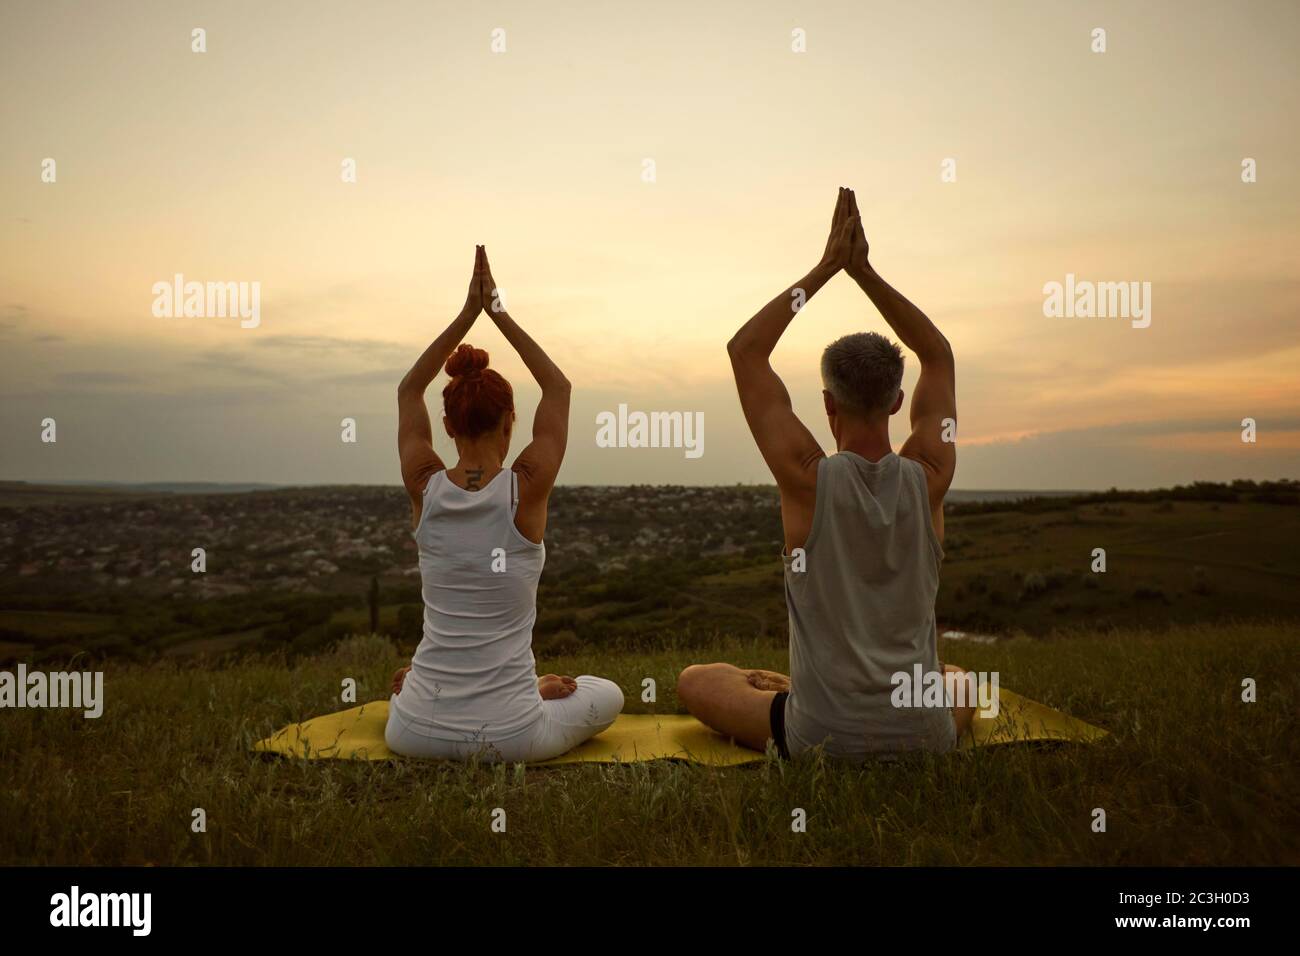 Couple meditating yoga sitting in lotus pose on the nature at dawn. Stock Photo